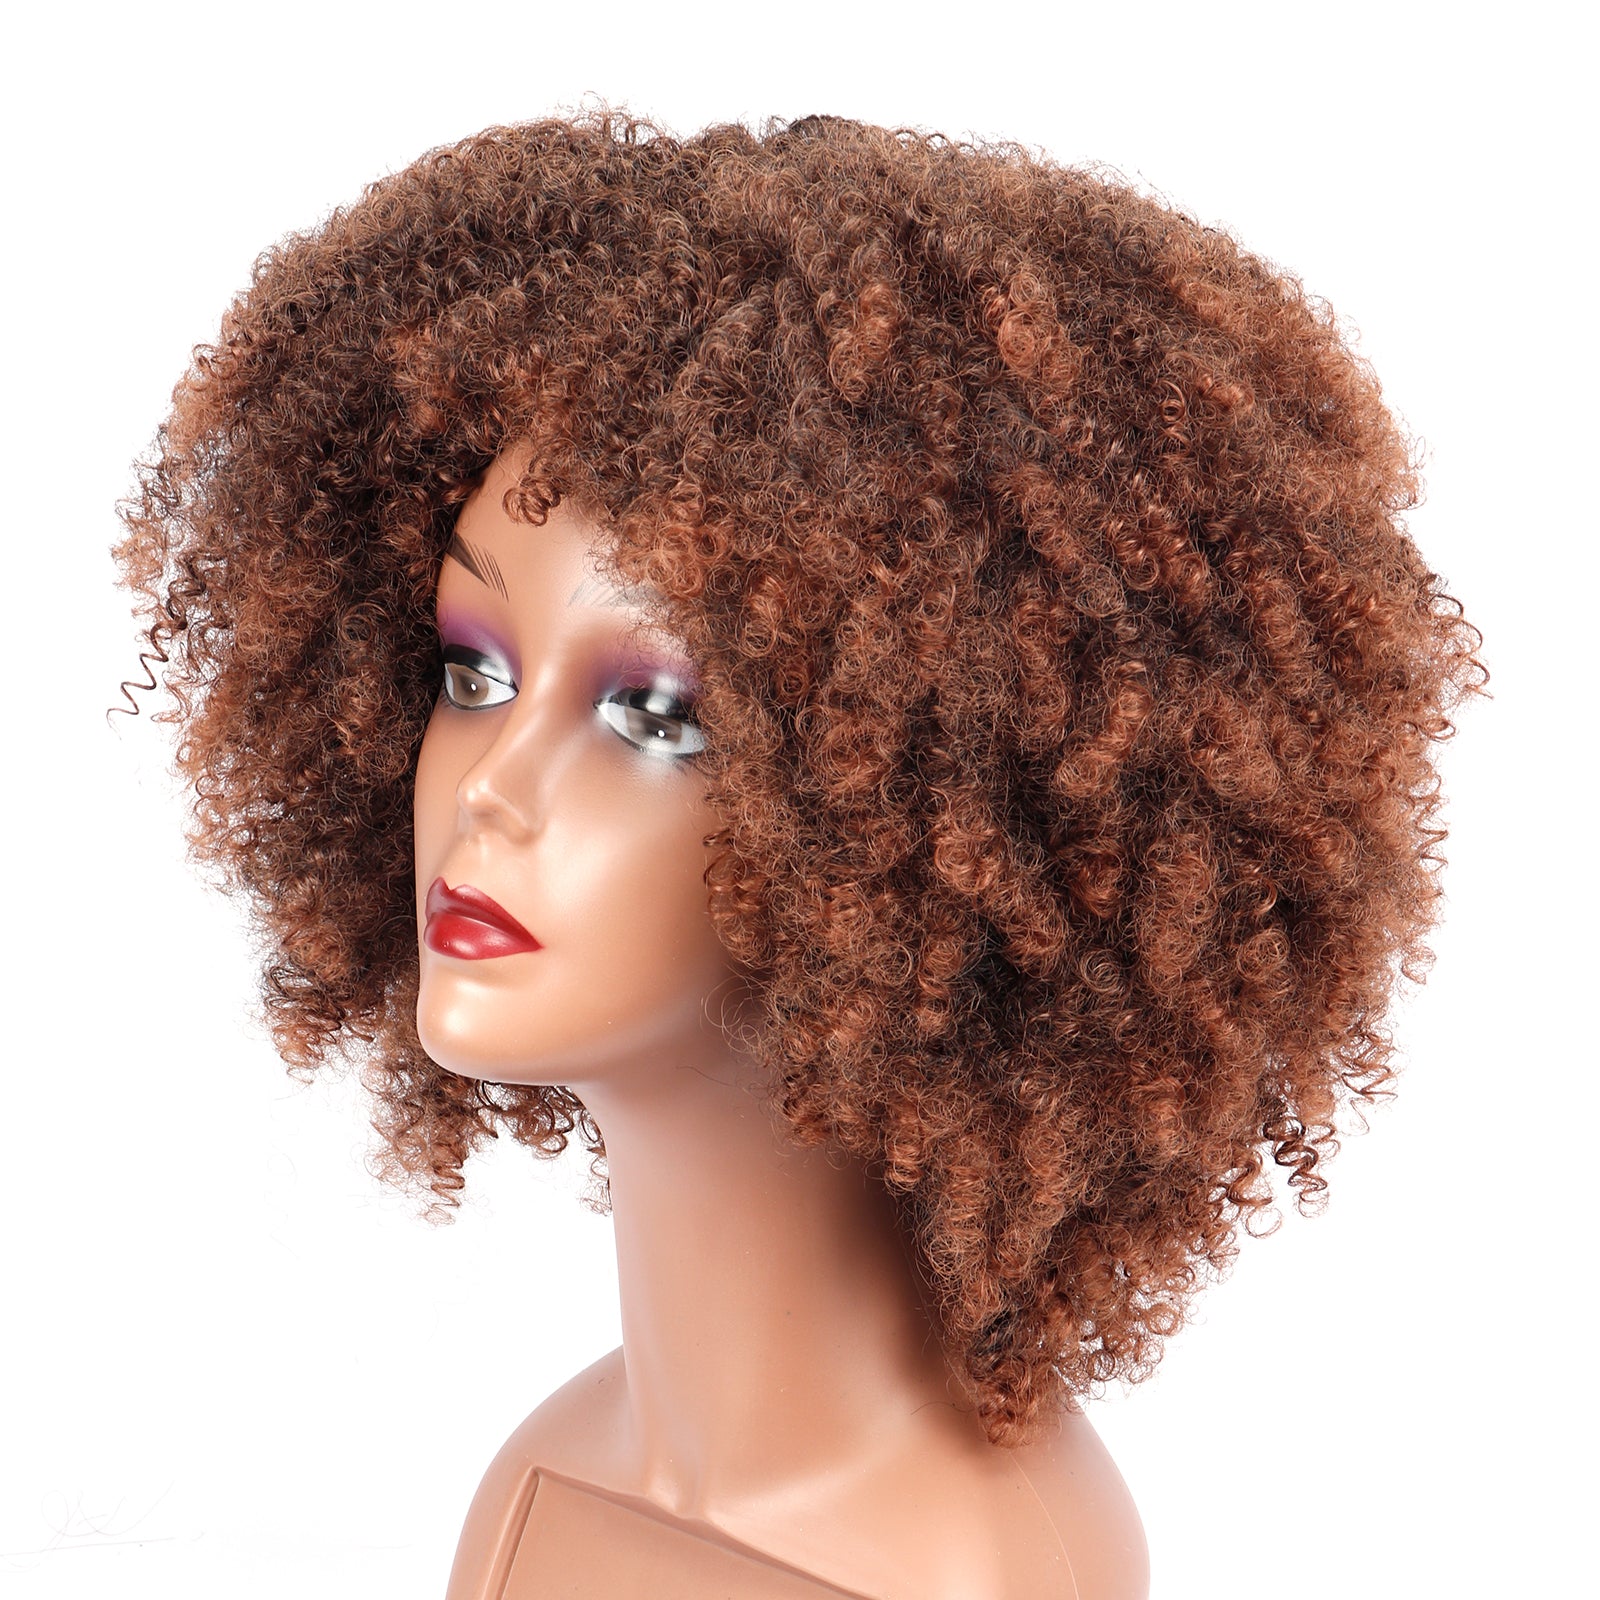 Toyotress Short Kinky Afro Curly Wigs 12